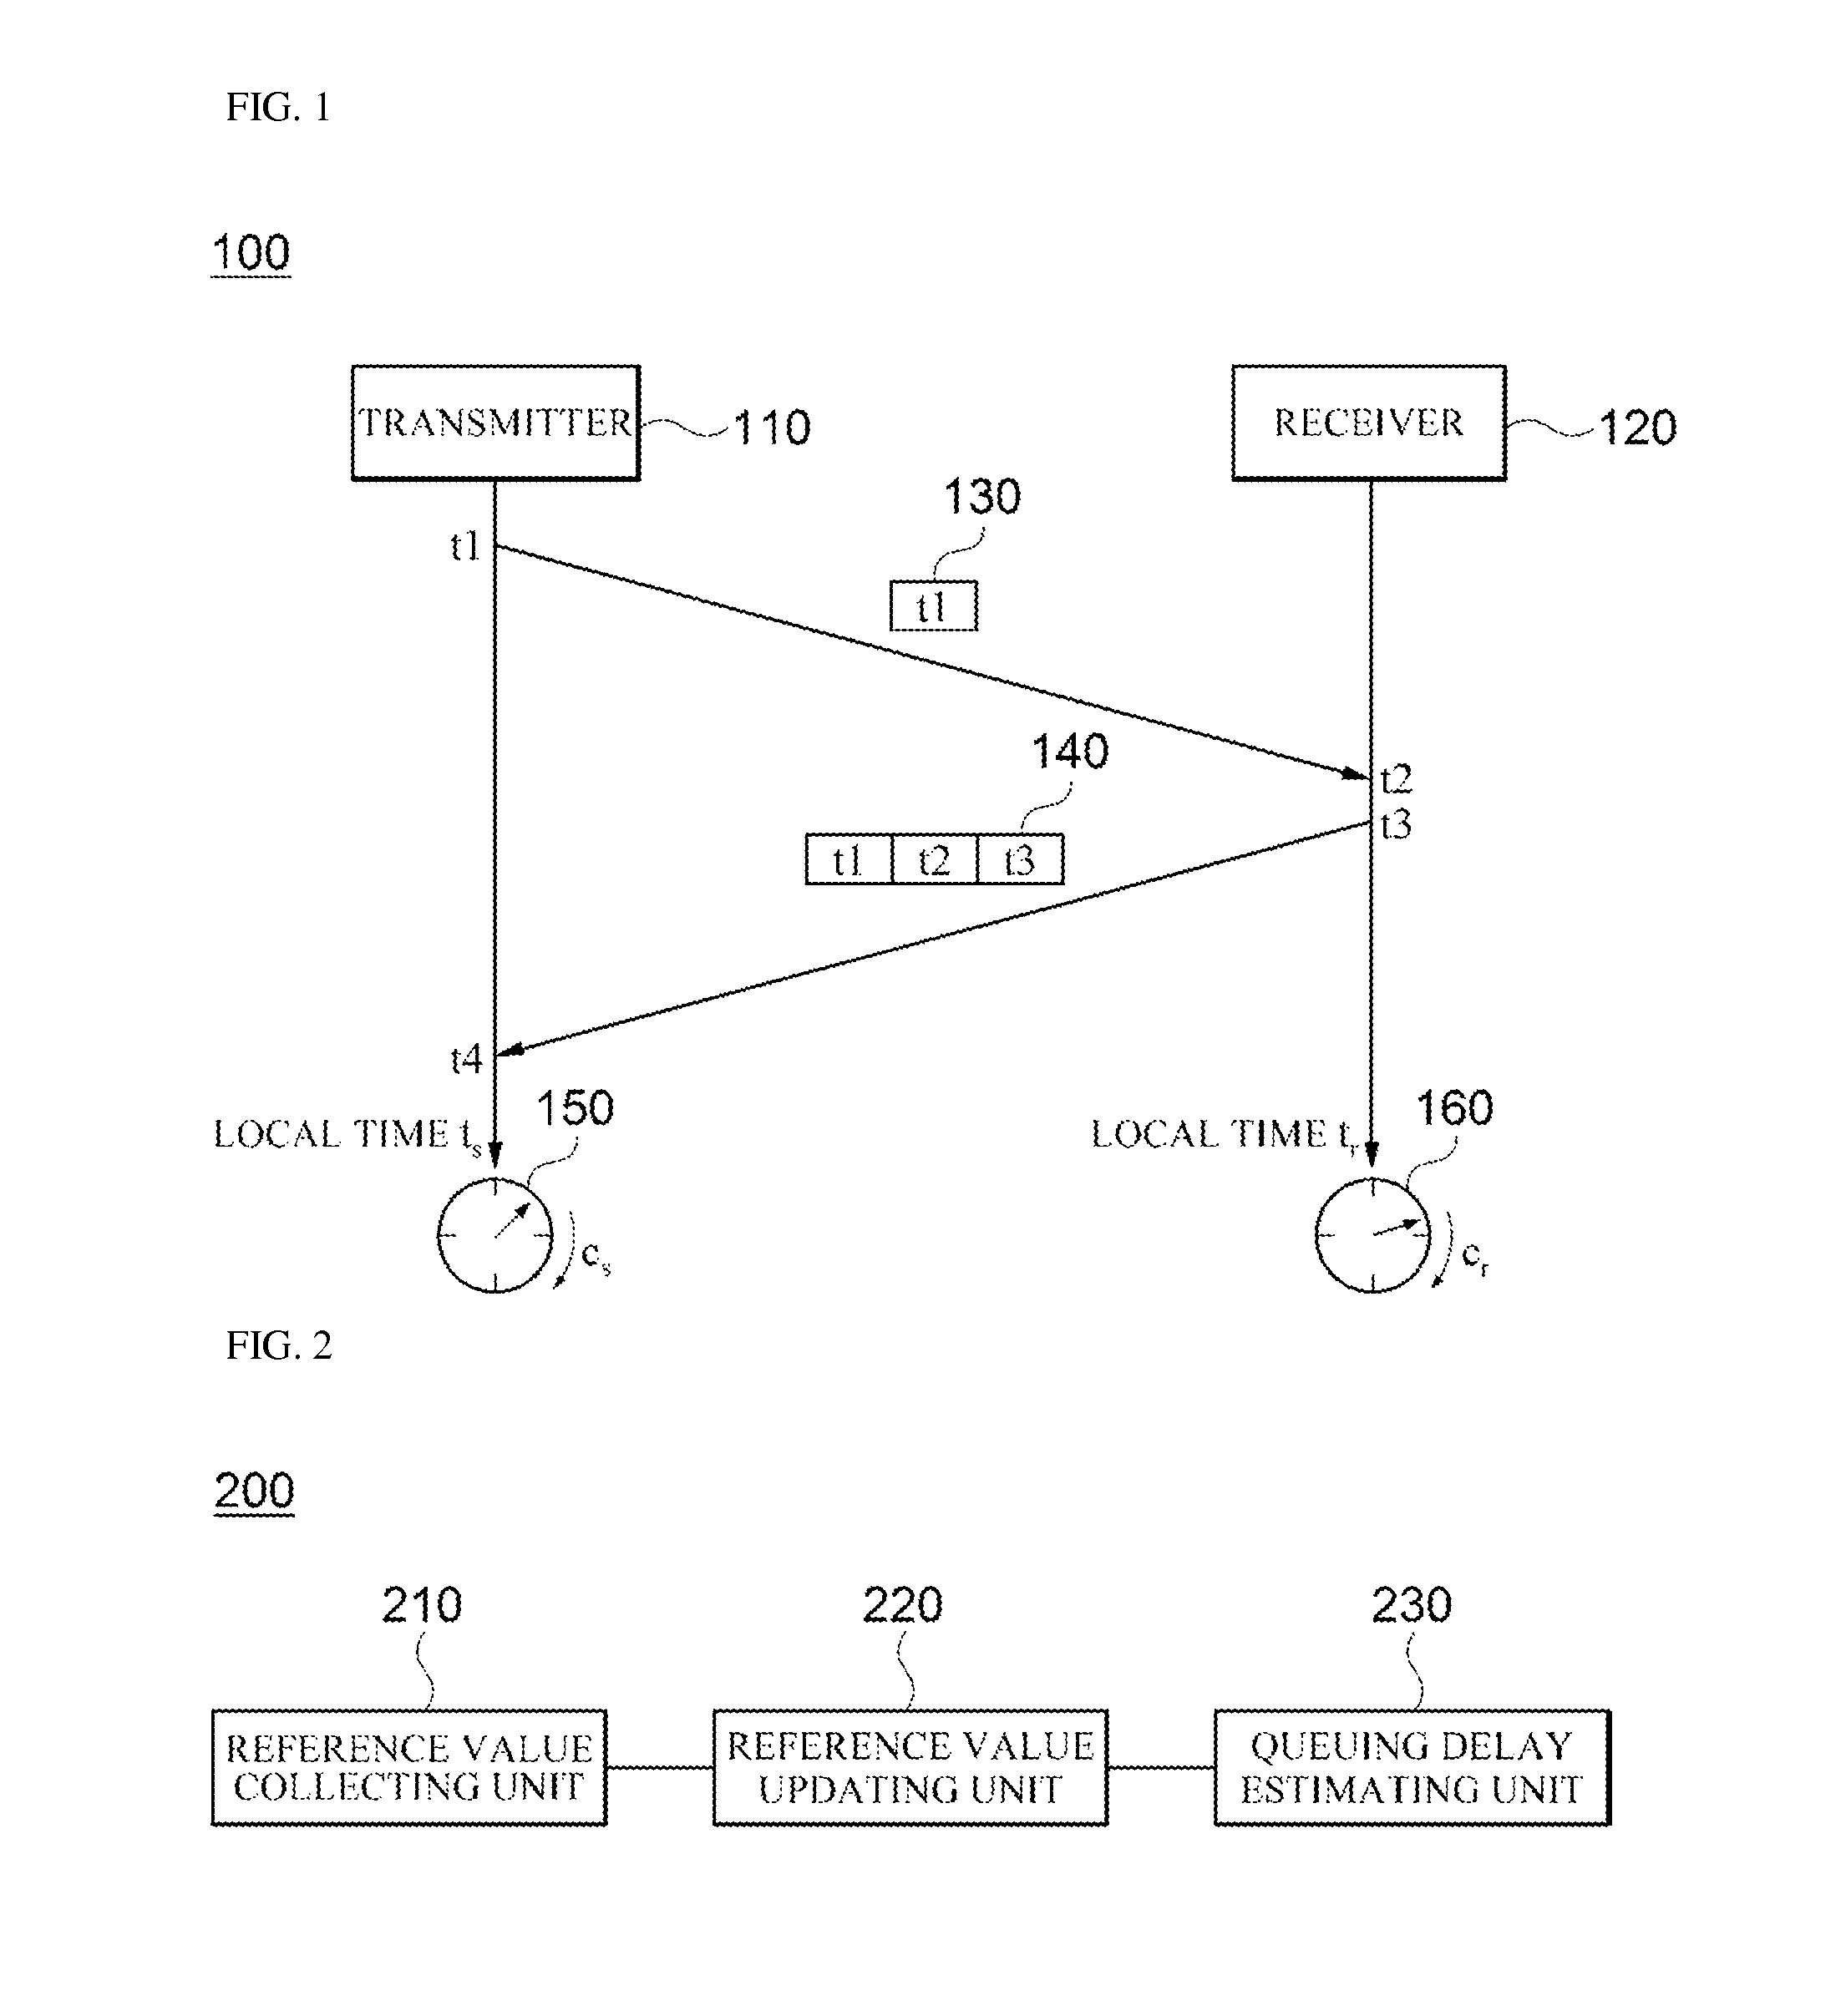 Method and apparatus for estimating queuing delay